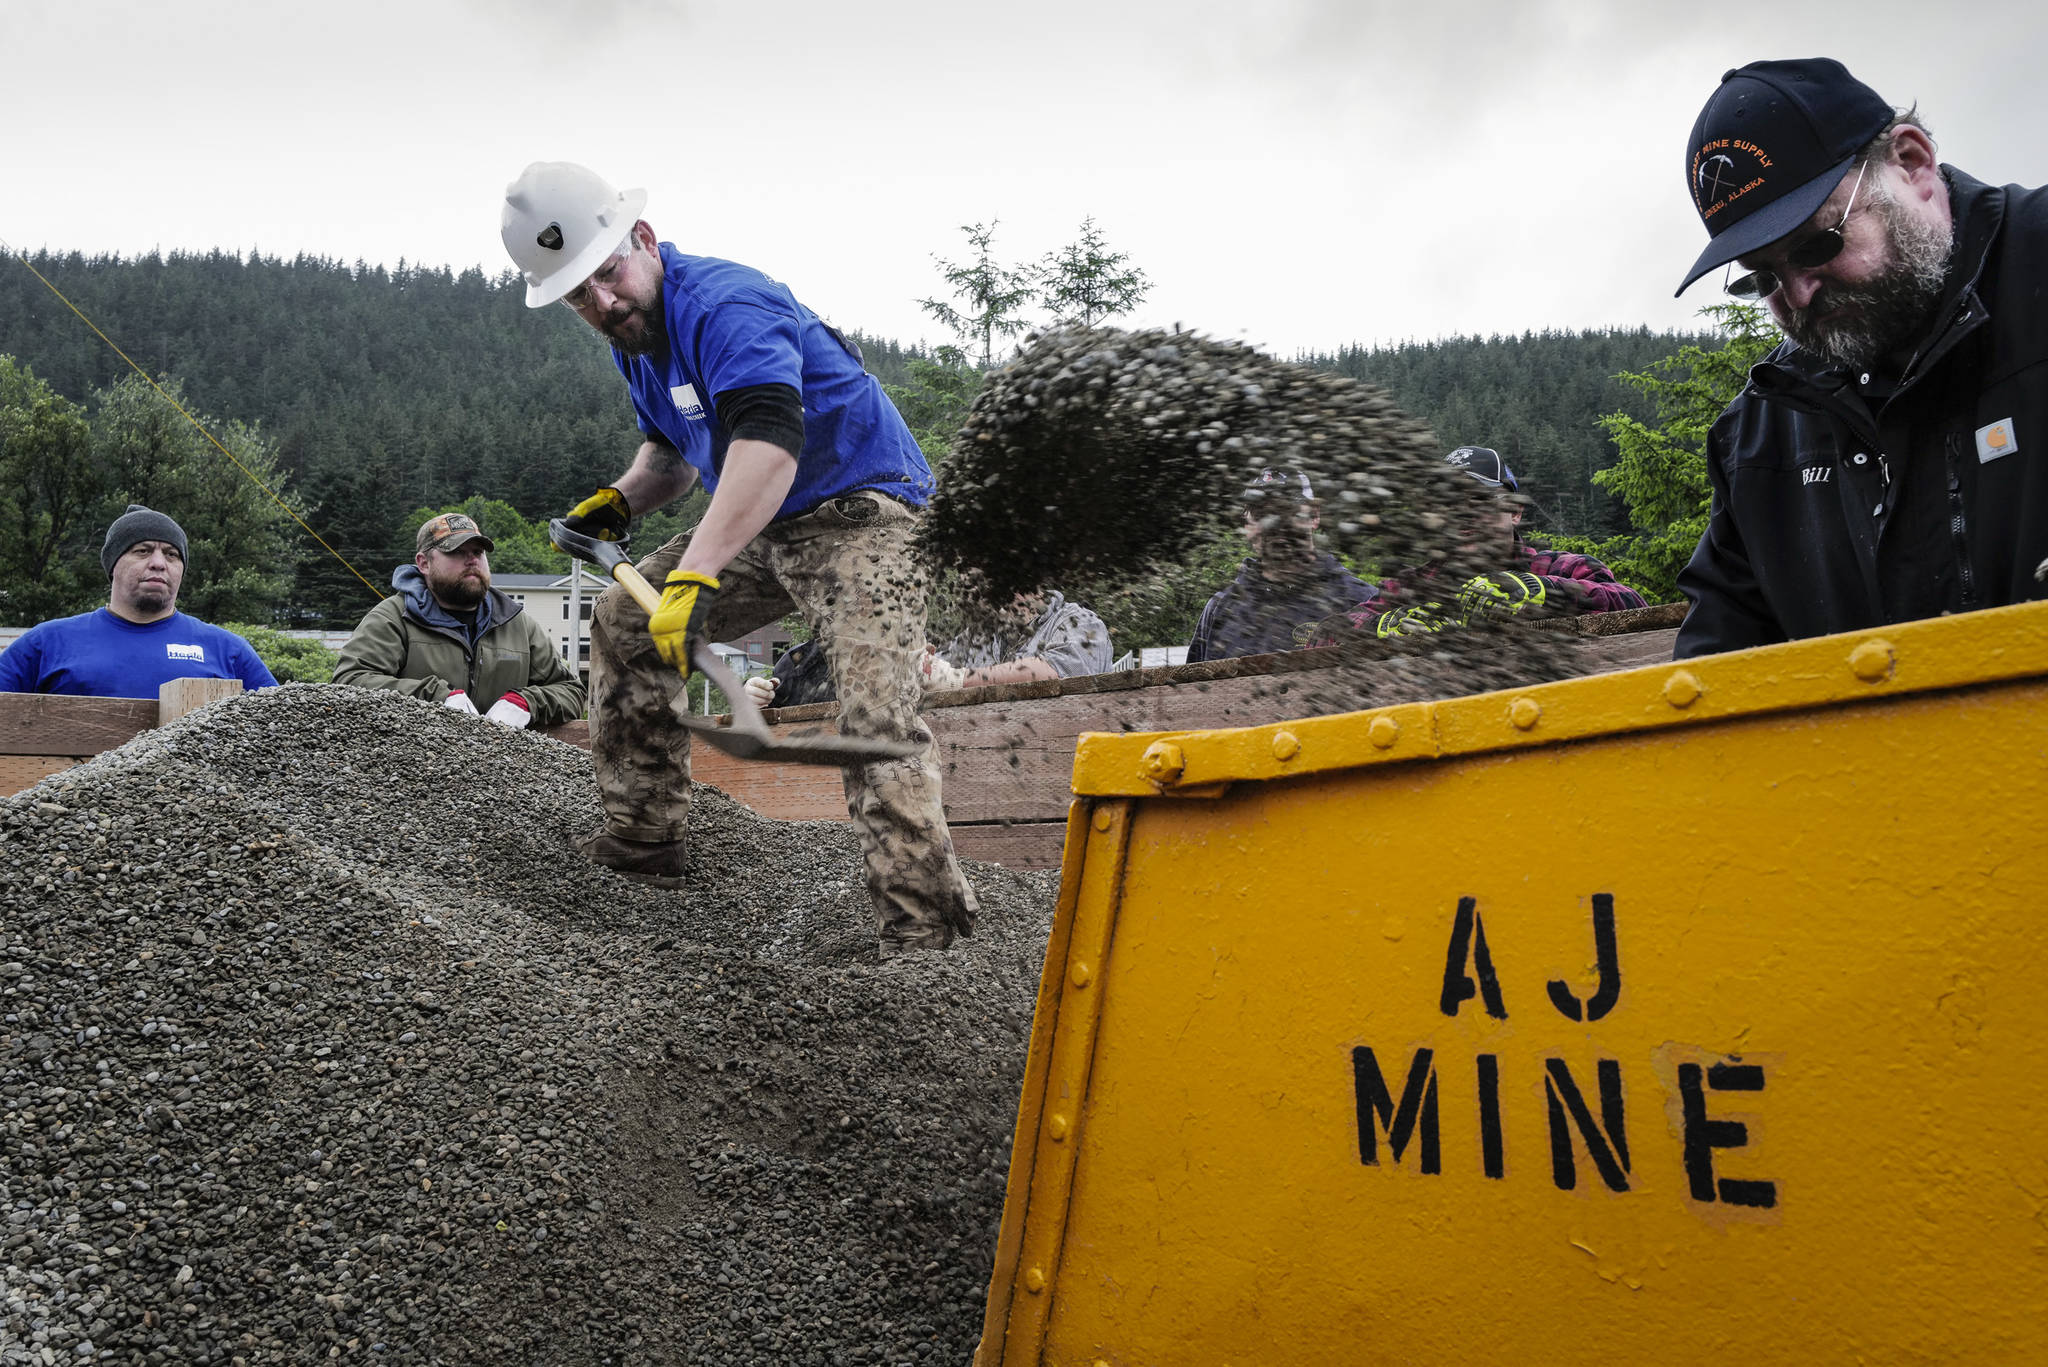 Heath Coro competes in the hand mucking contest as judge Bill Wilcox watches during the Mining & Logging Competition at the 29th Annual Gold Rush Days at Savikko Park on Saturday, June 22, 2019. The event has been canceled for 2021. (Michael Penn / Juneau Empire File)